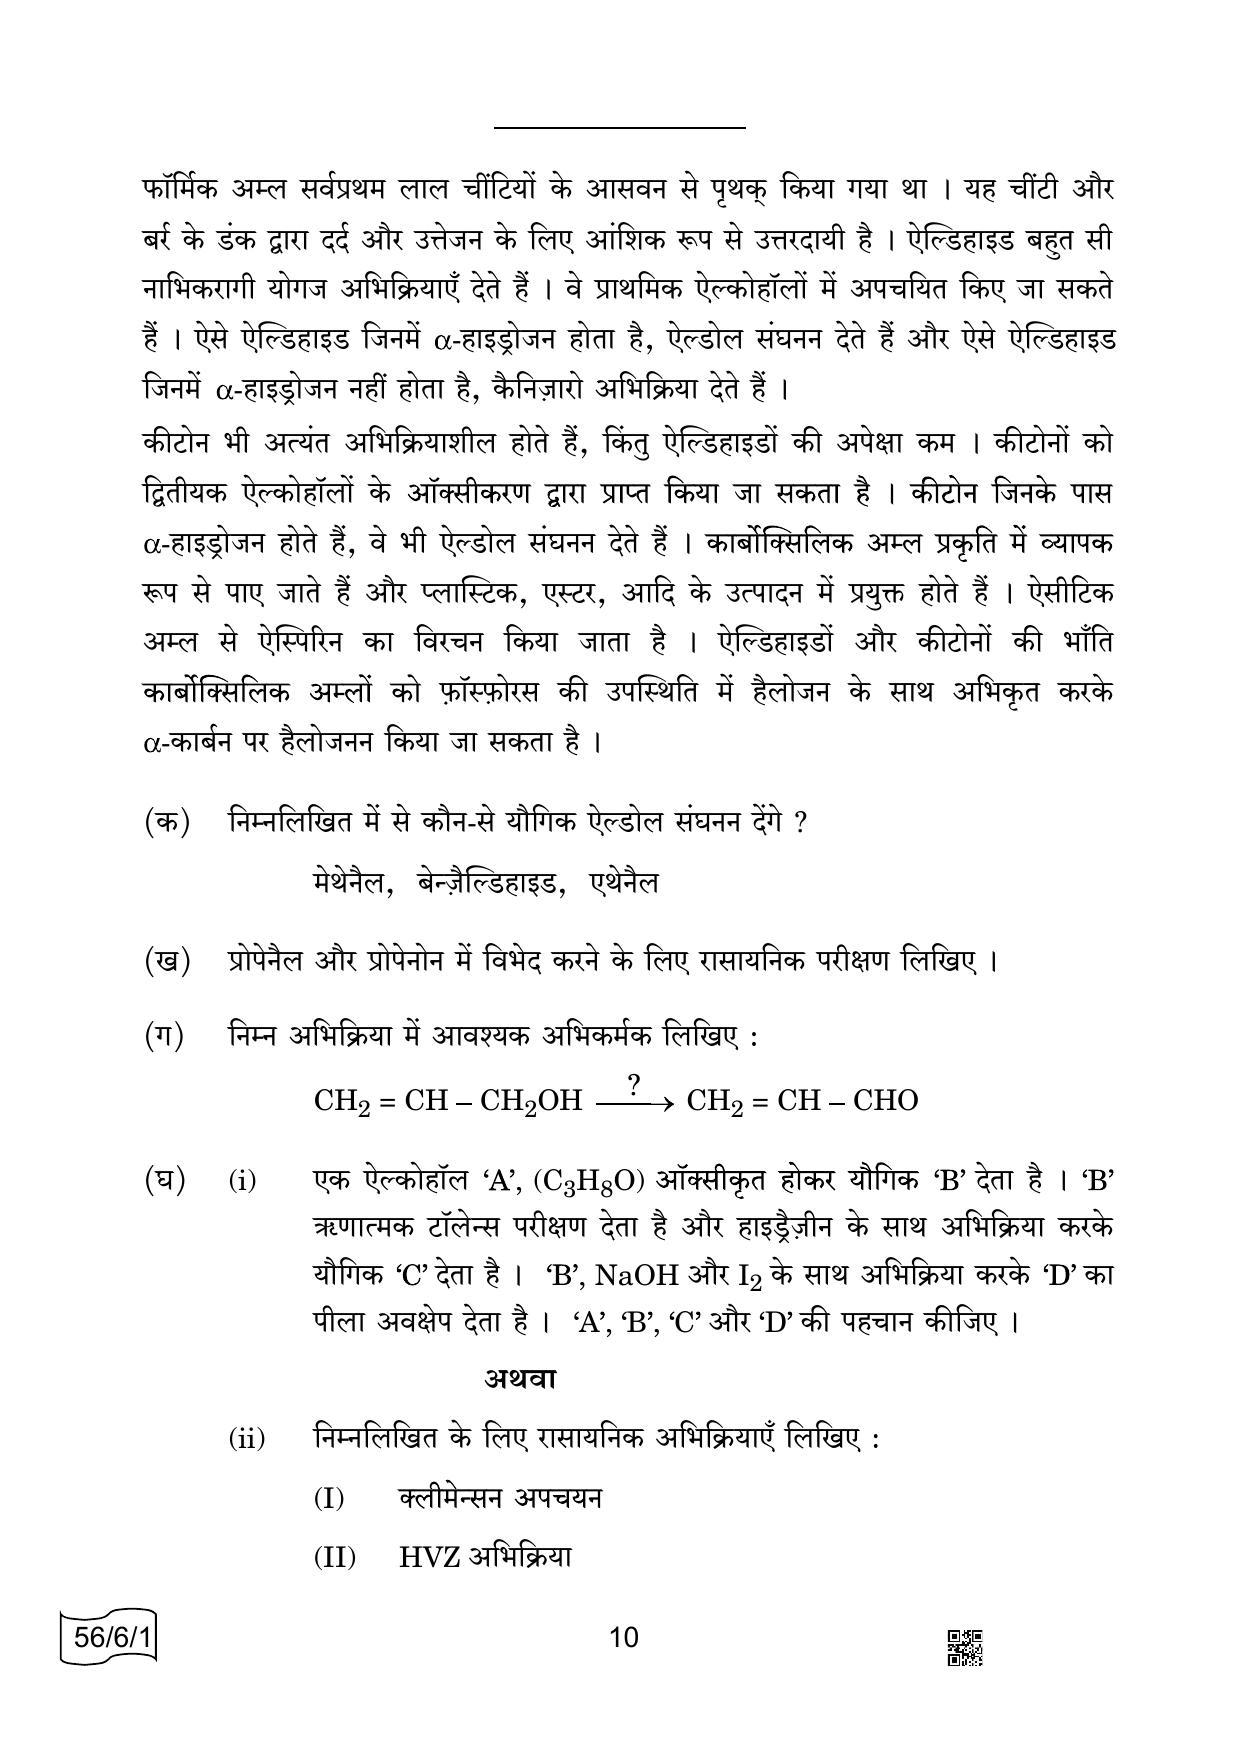 CBSE Class 12 56-6-1 CHEMISTRY 2022 Compartment Question Paper - Page 10